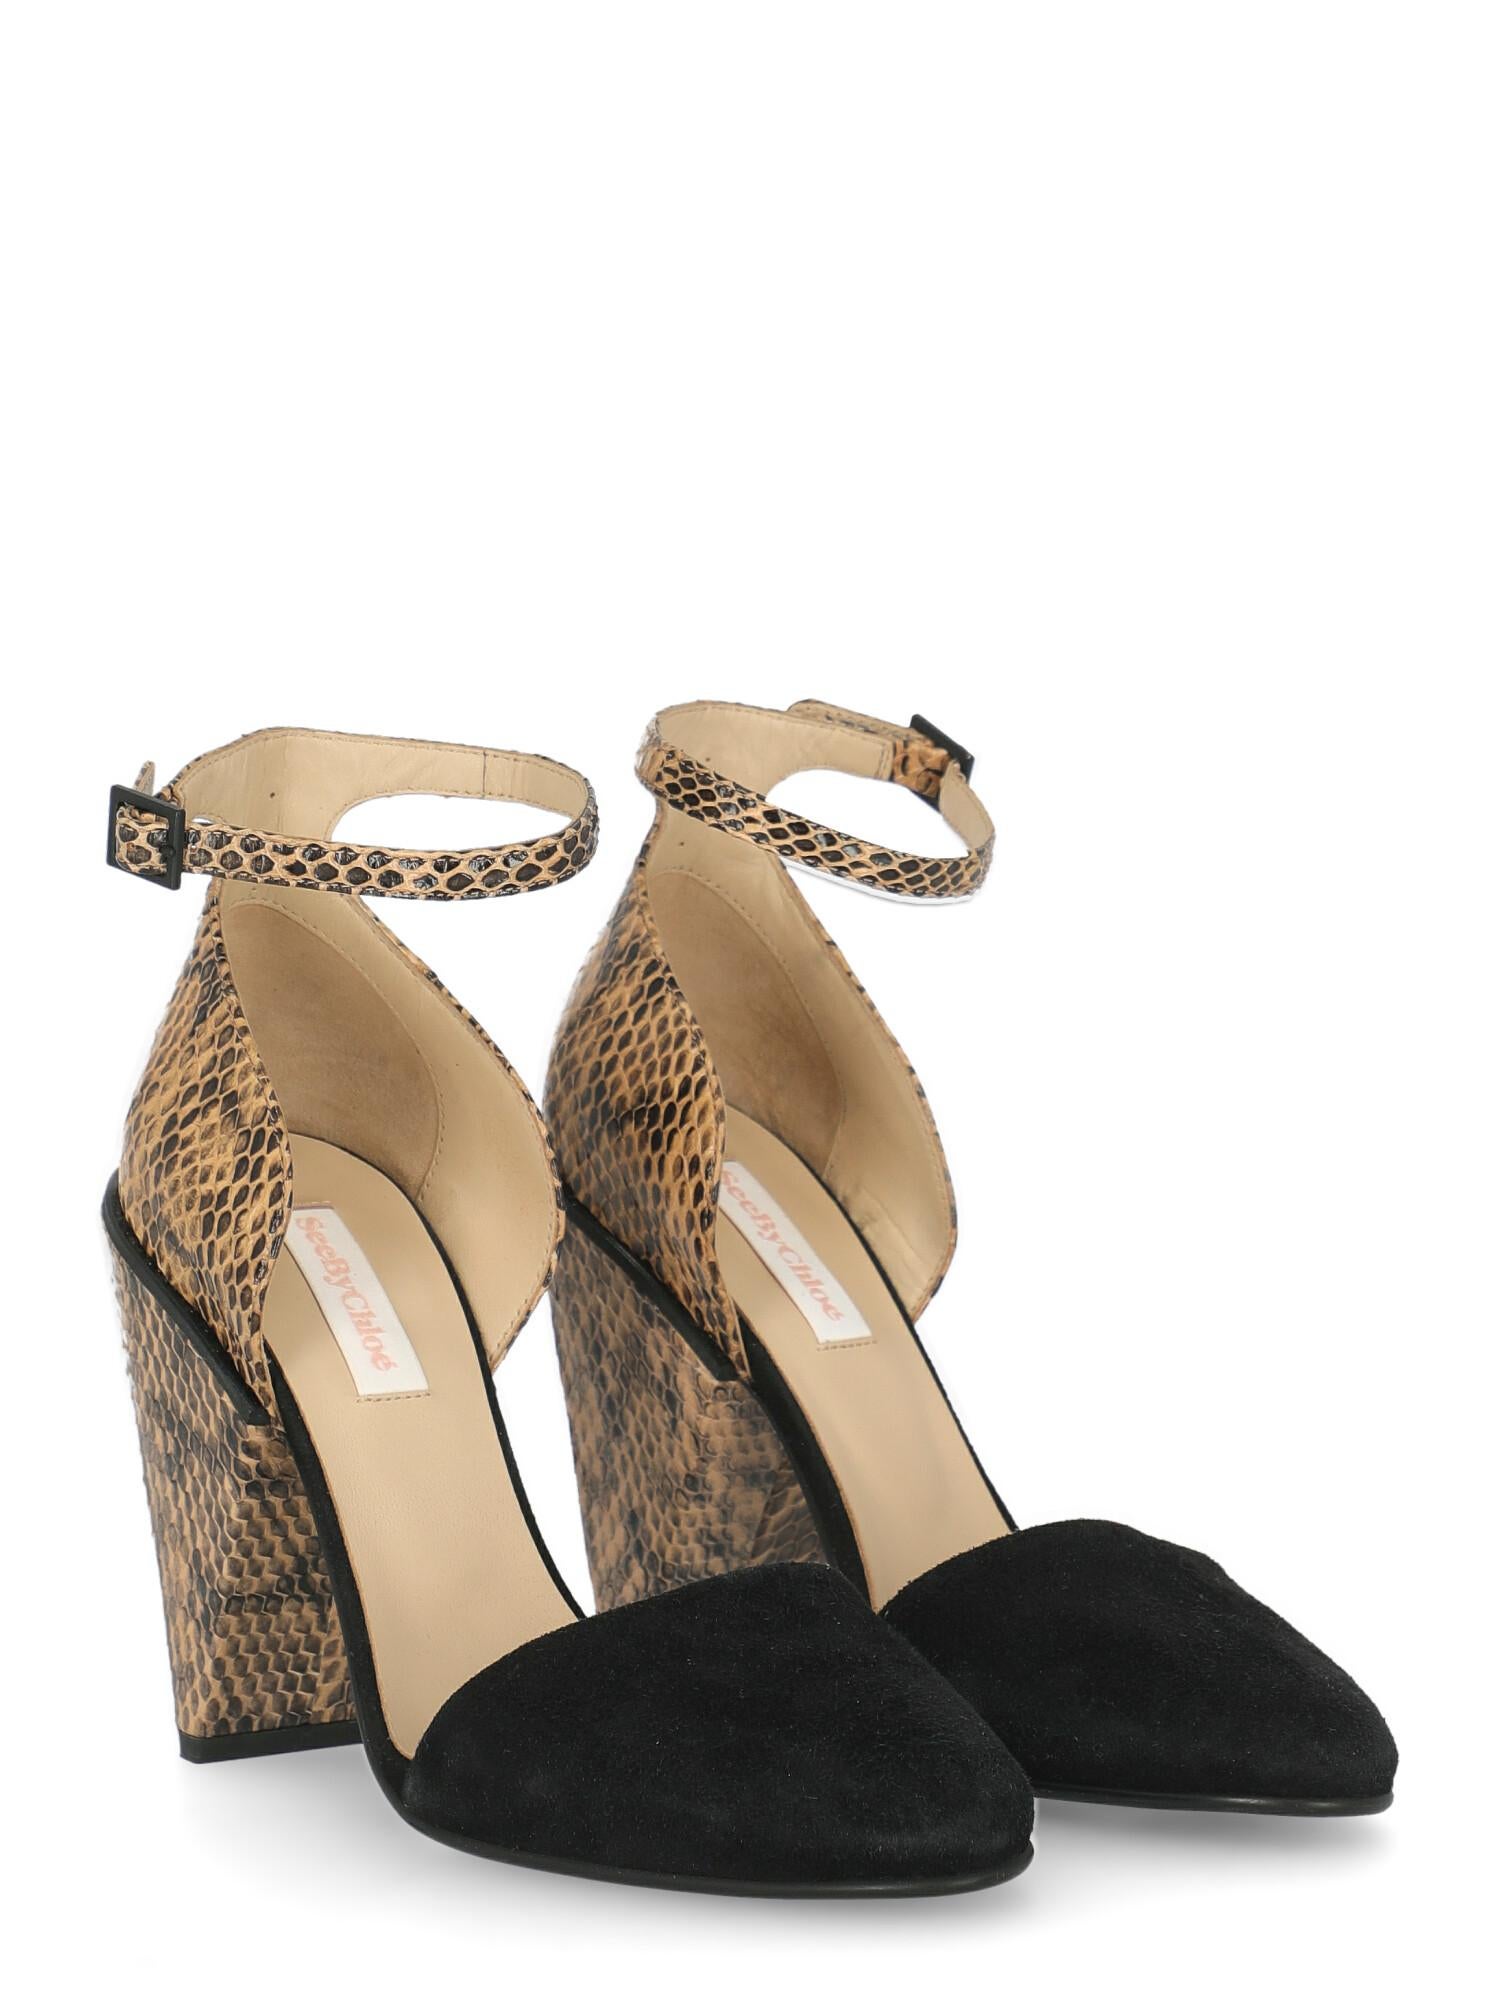 Product Description: Pumps, leather, snake print, buckle fastening, pointed toe, branded insole, block heel, high heel

Includes: N/A

Product Condition: Very Good
Upper: negligible abrasions.

Measurements:
Height: 11 cm

Composition:
Upper: 100%